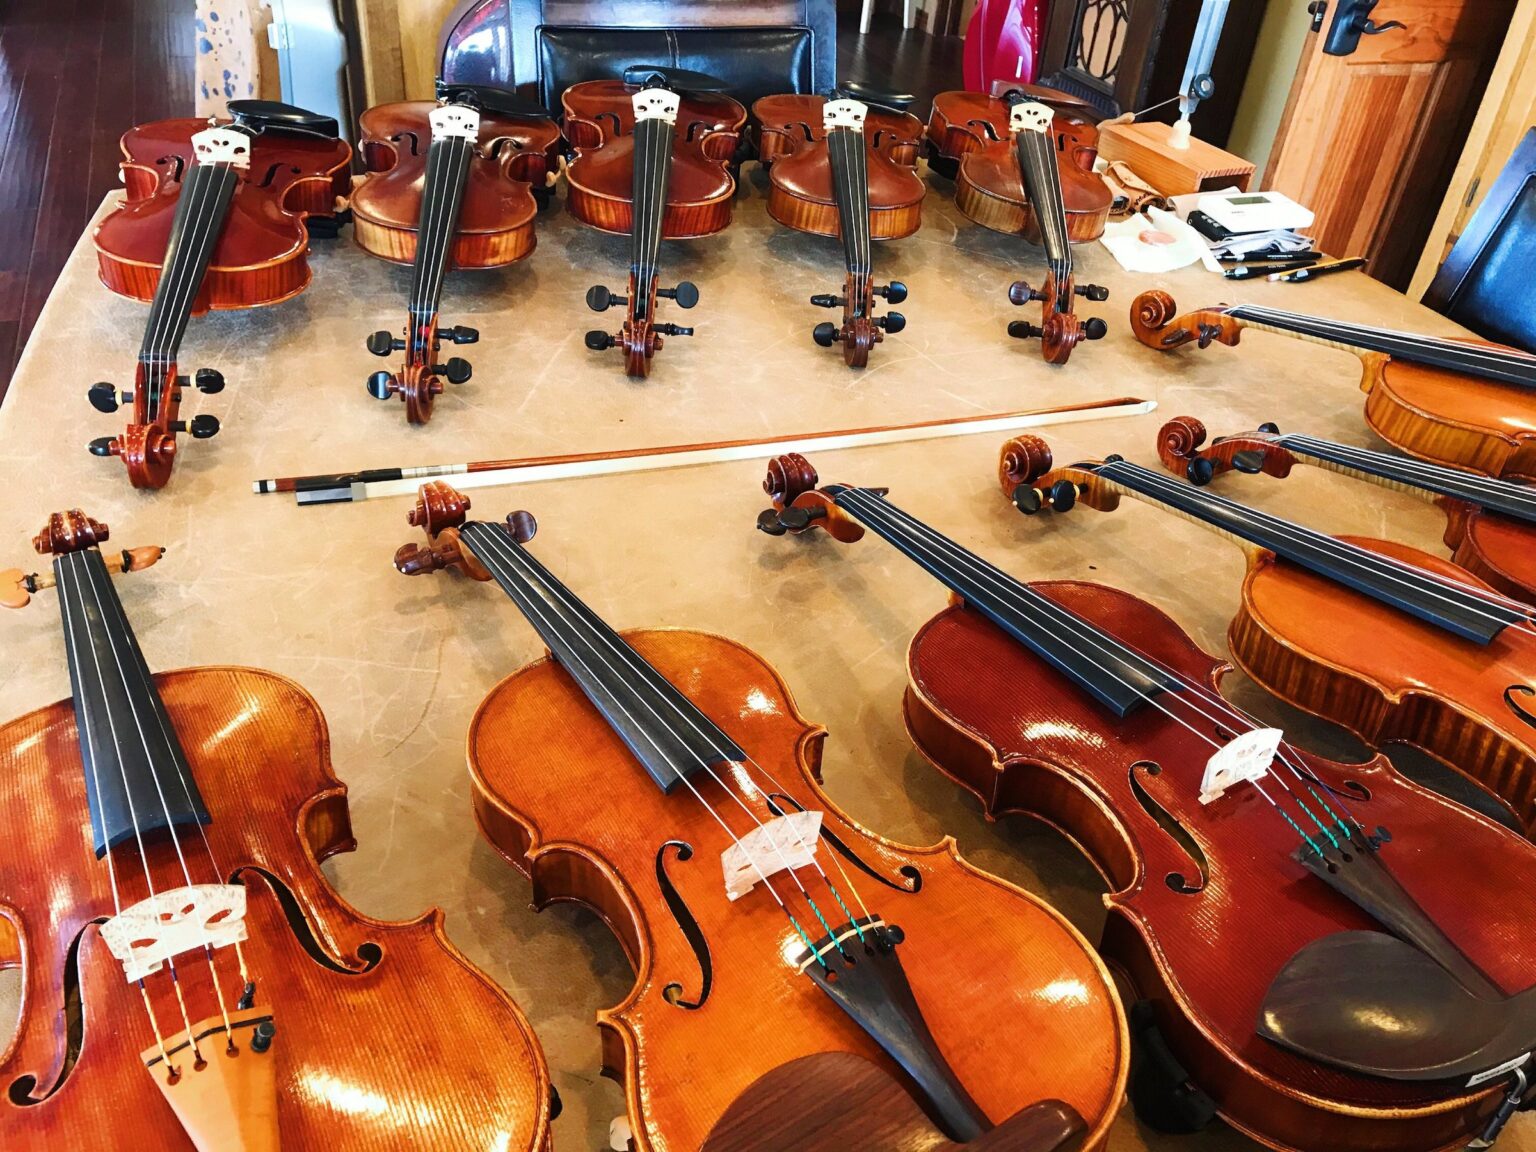 Finding a violin shop is crucial for musicians seeking to invest in a top-quality instrument while receiving service. Here's our guide for musicians.